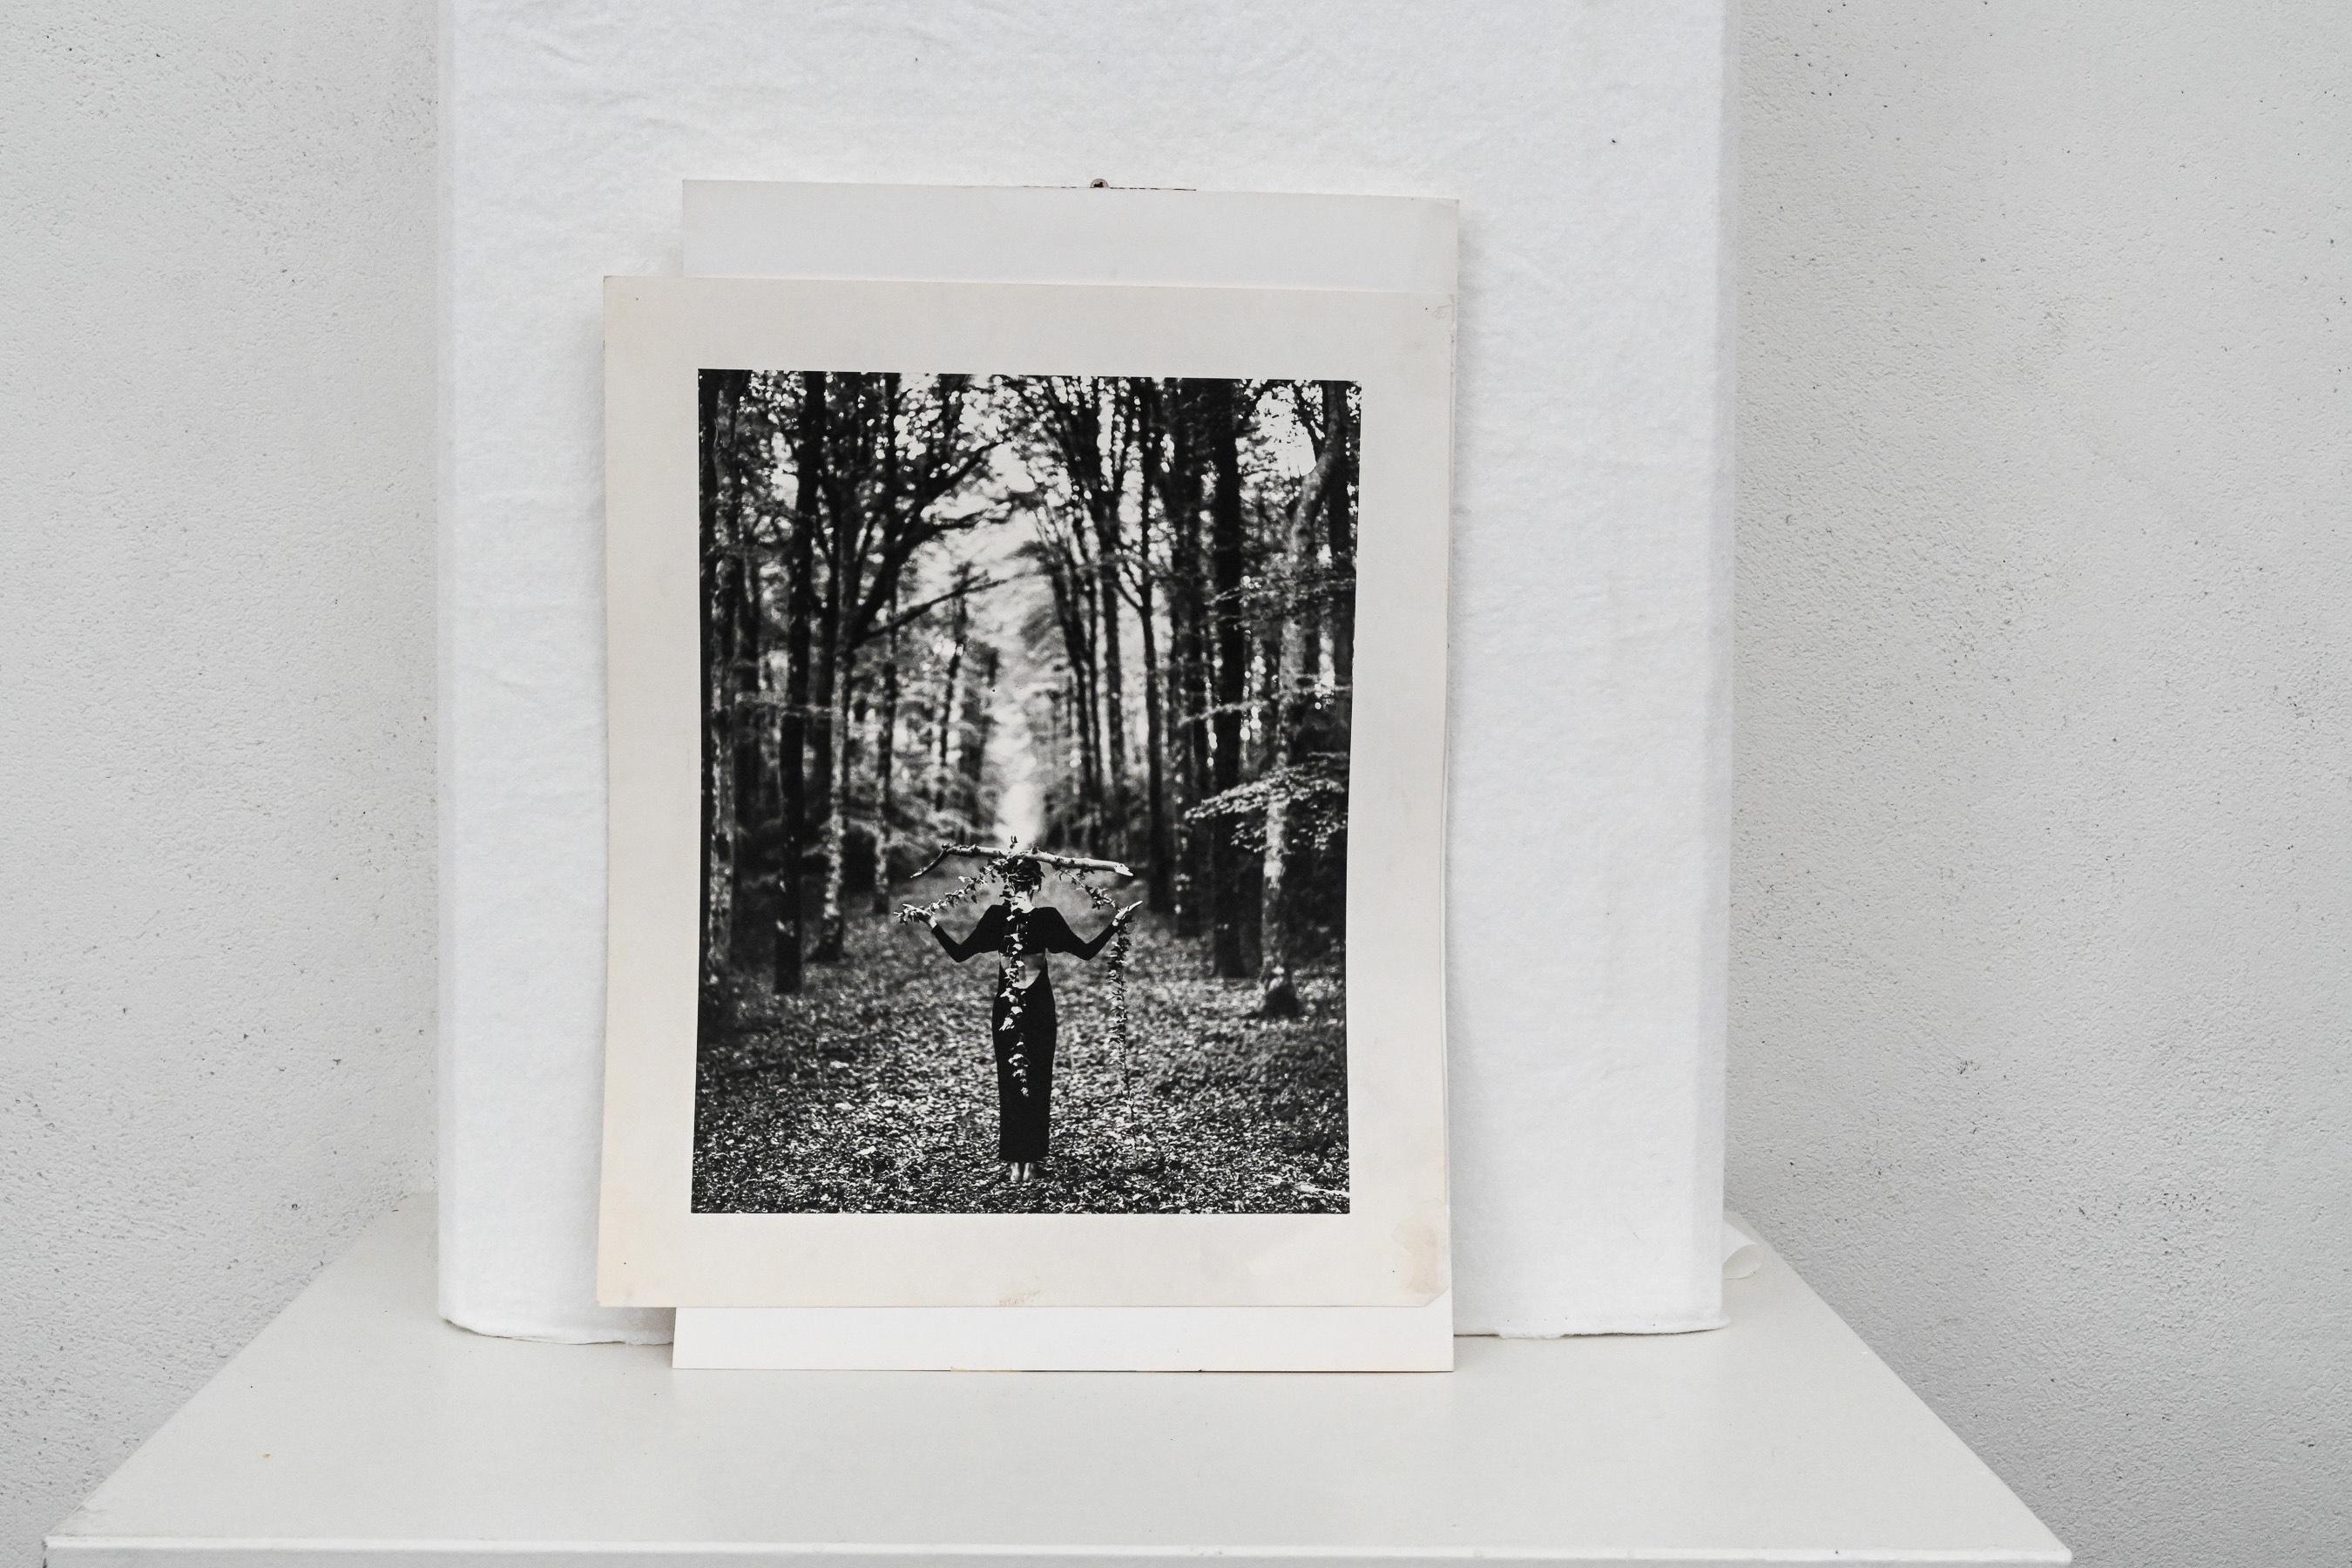 Original photograph of model in the woods by Bruce Weber for Karl Lagerfeld 4 For Sale 3